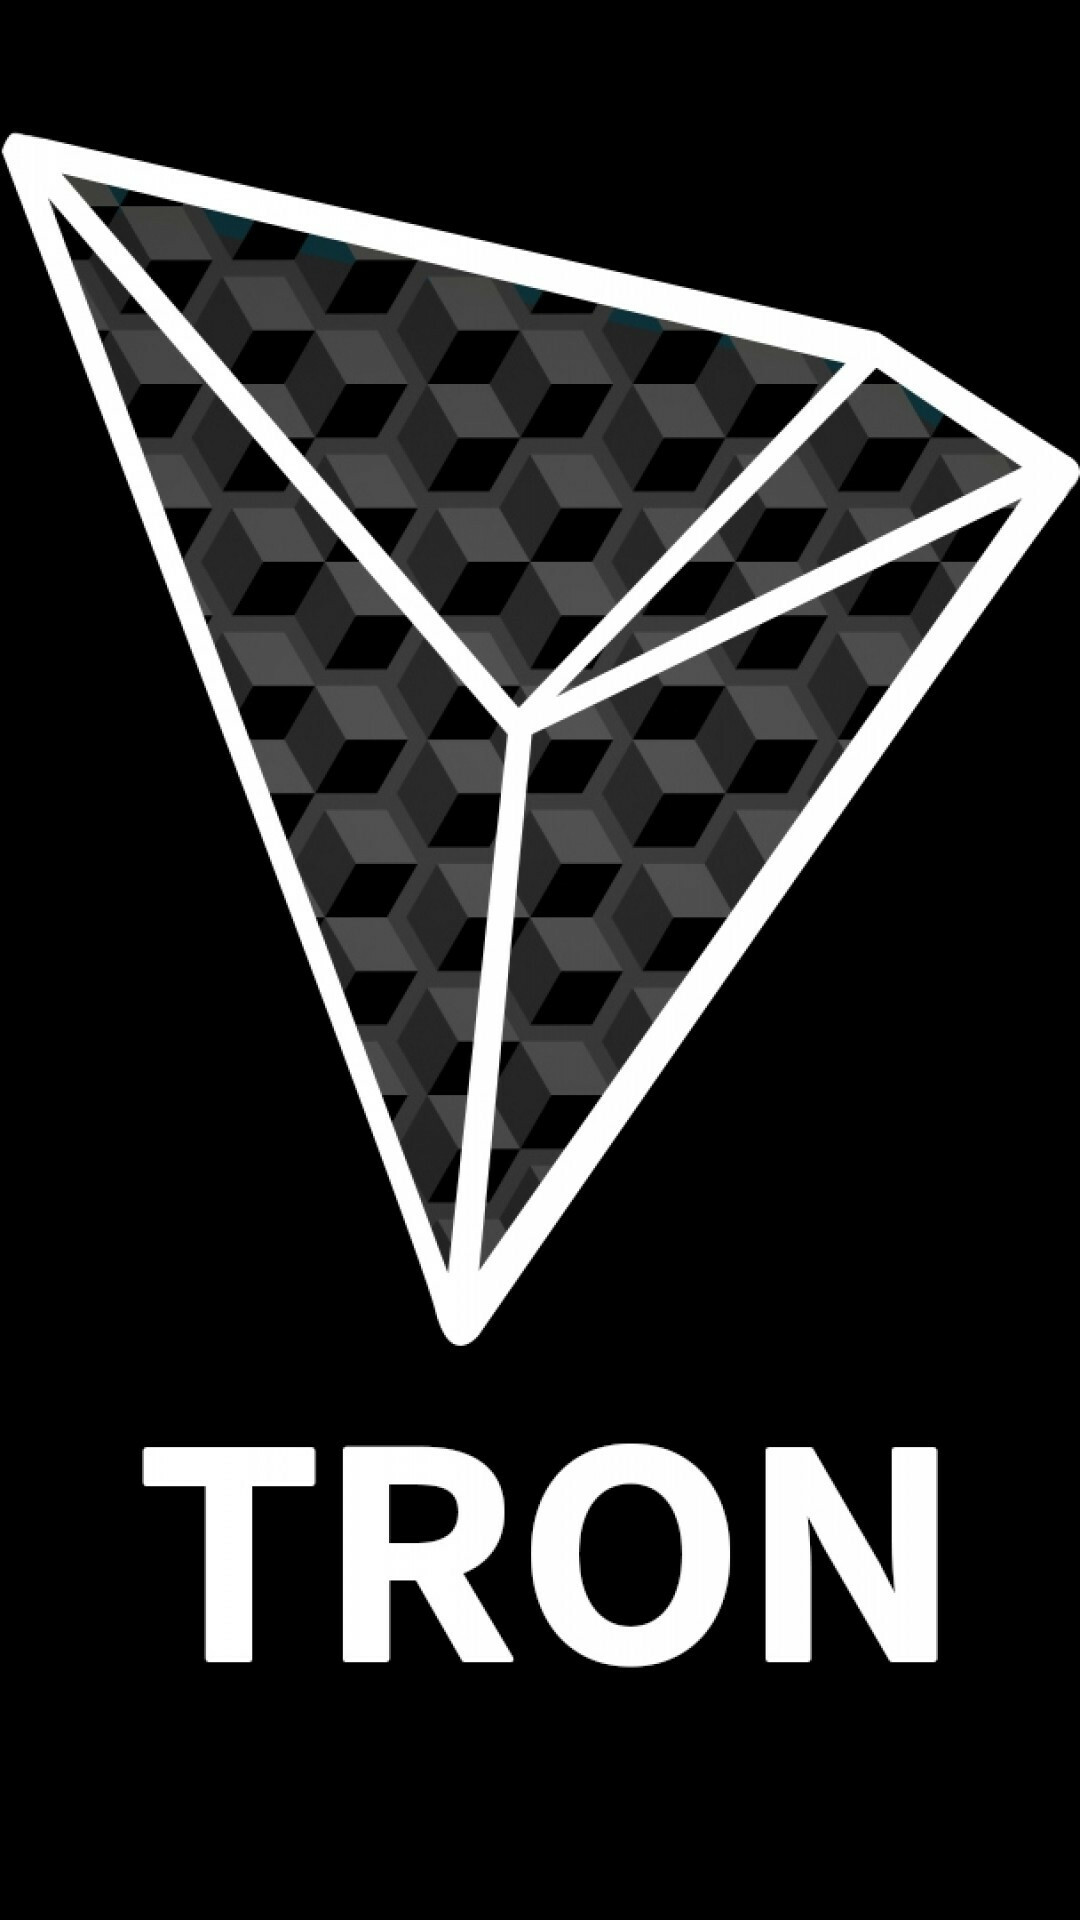 Cryptocurrency: Tron, A blockchain-based decentralized digital platform with its own token, TRX. 1080x1920 Full HD Background.